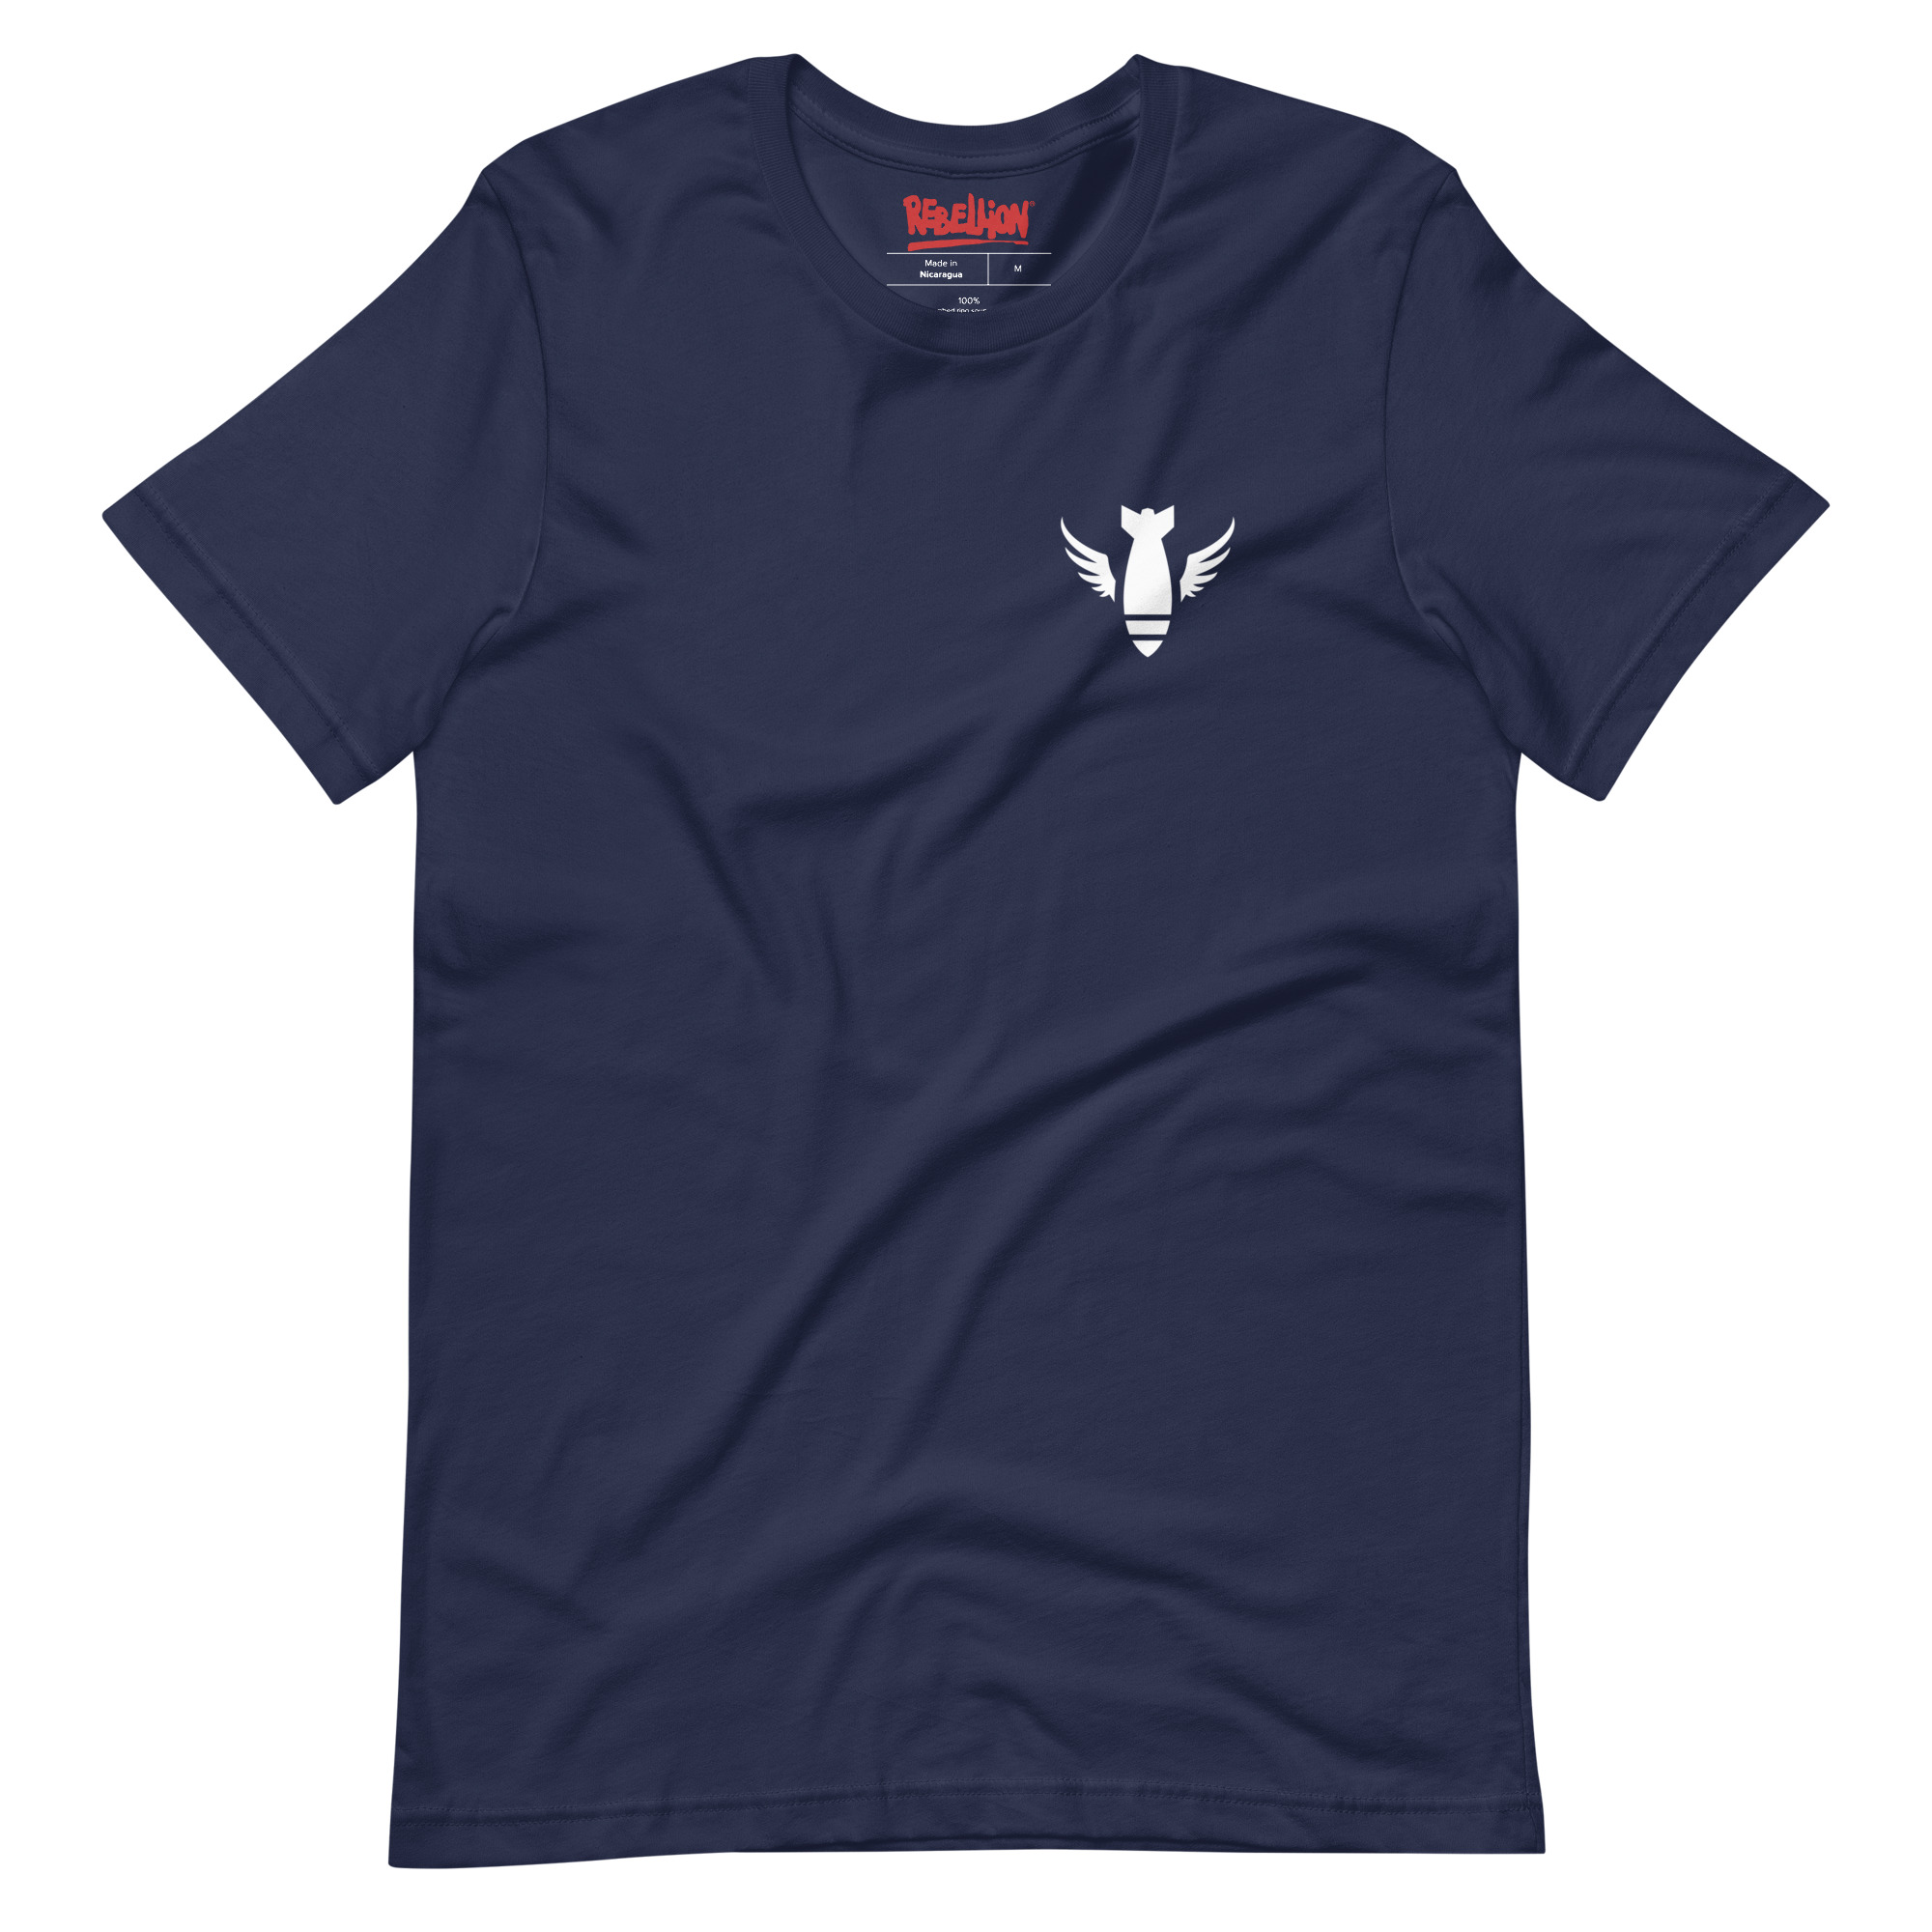 Image of a Navy coloured Sniper Elite 5 t-shirt featuring a small Commandos emblem on the left breast pocket